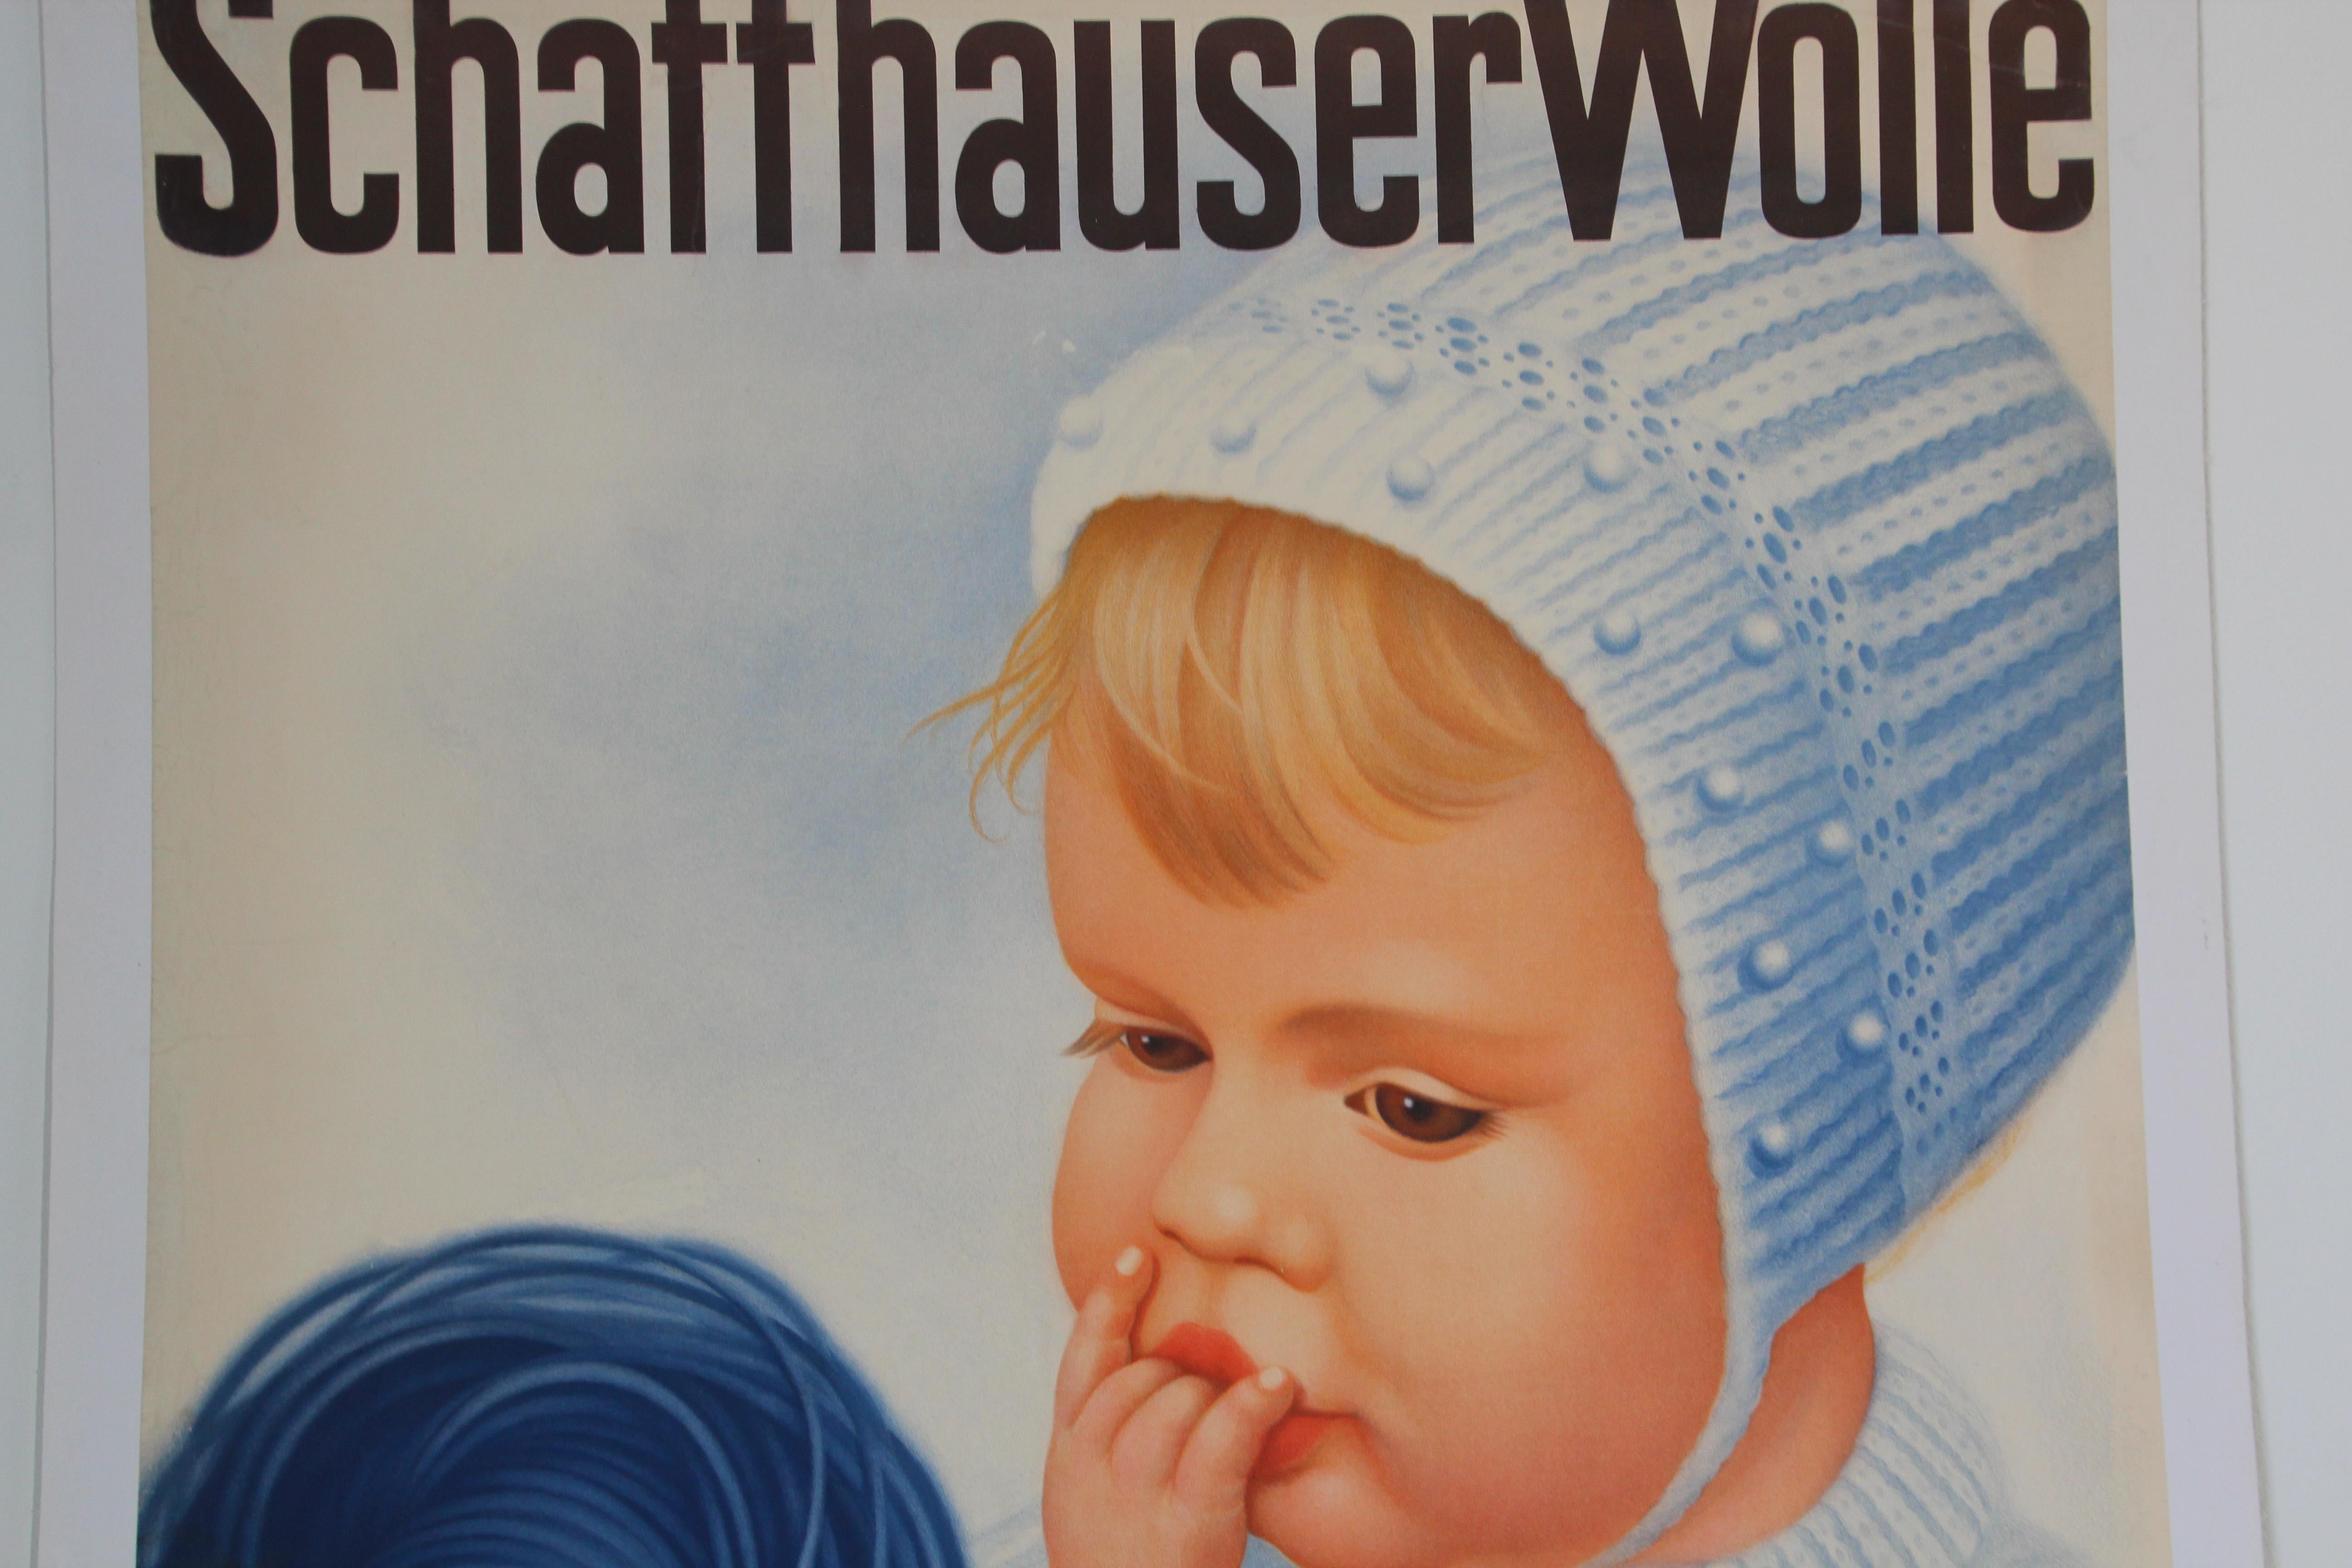 Swiss Schaffhauser Wolle Wool Yarn Knitting 1934 Baby Blue Vintage Poster  For Sale 1